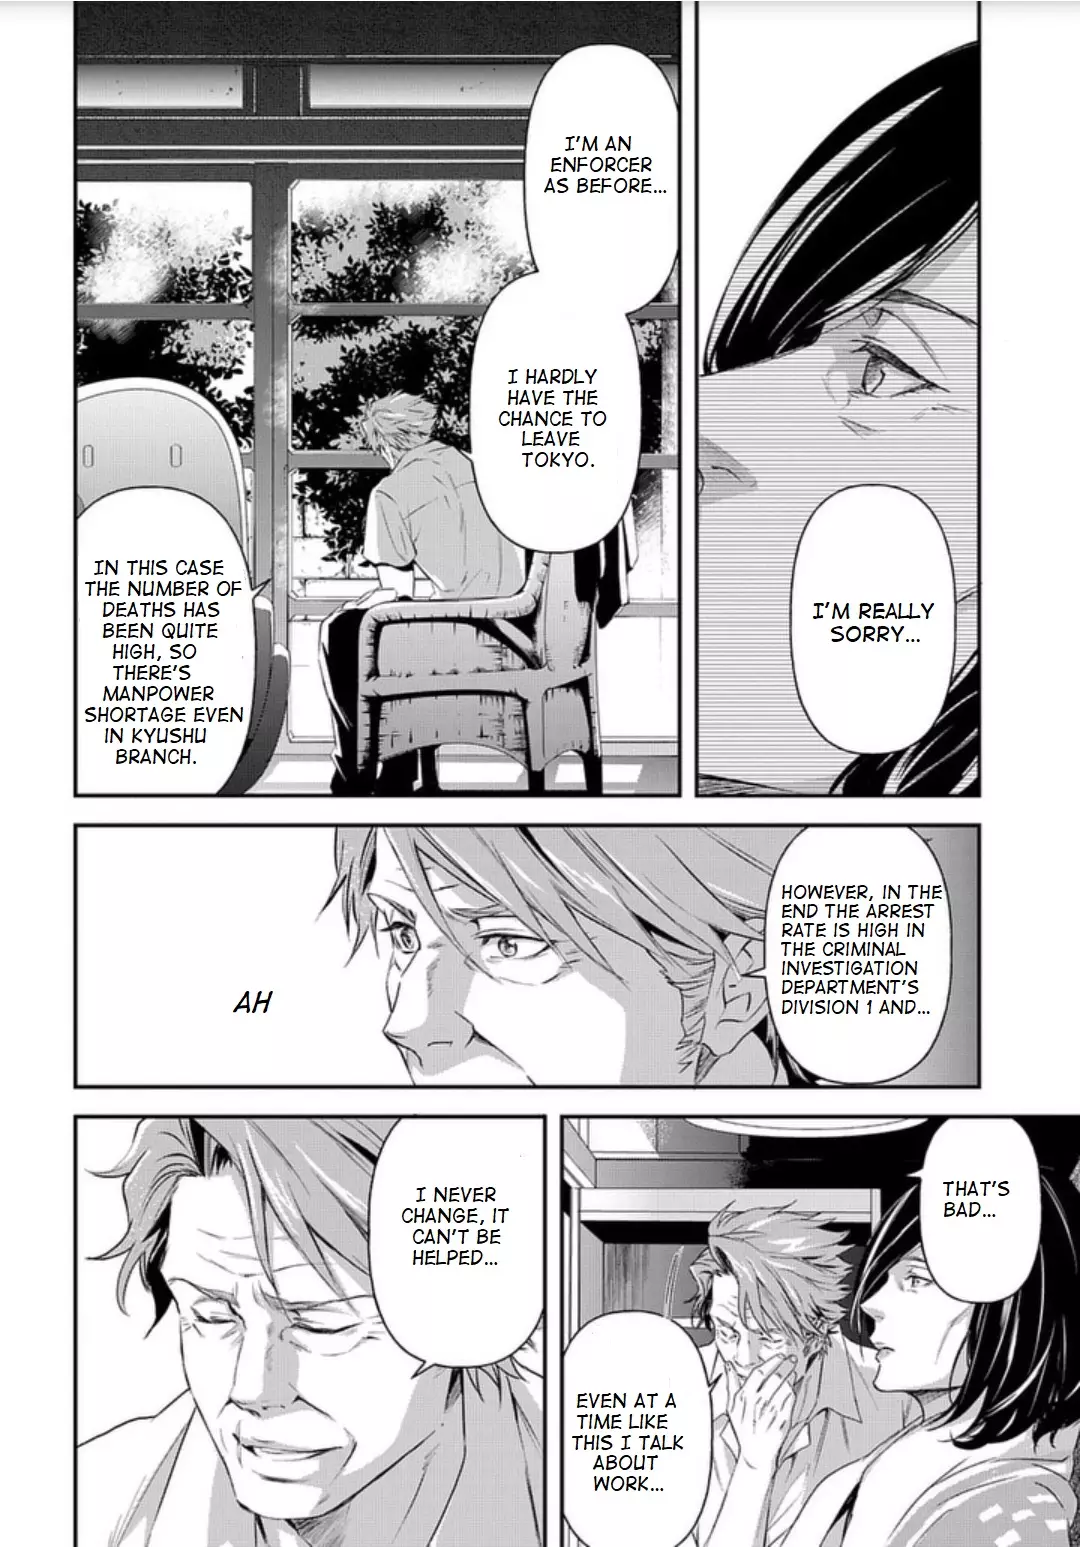 Psycho-Pass: Sinners Of The System Case 2 - First Guardian - 3 page 24-dc62f31f